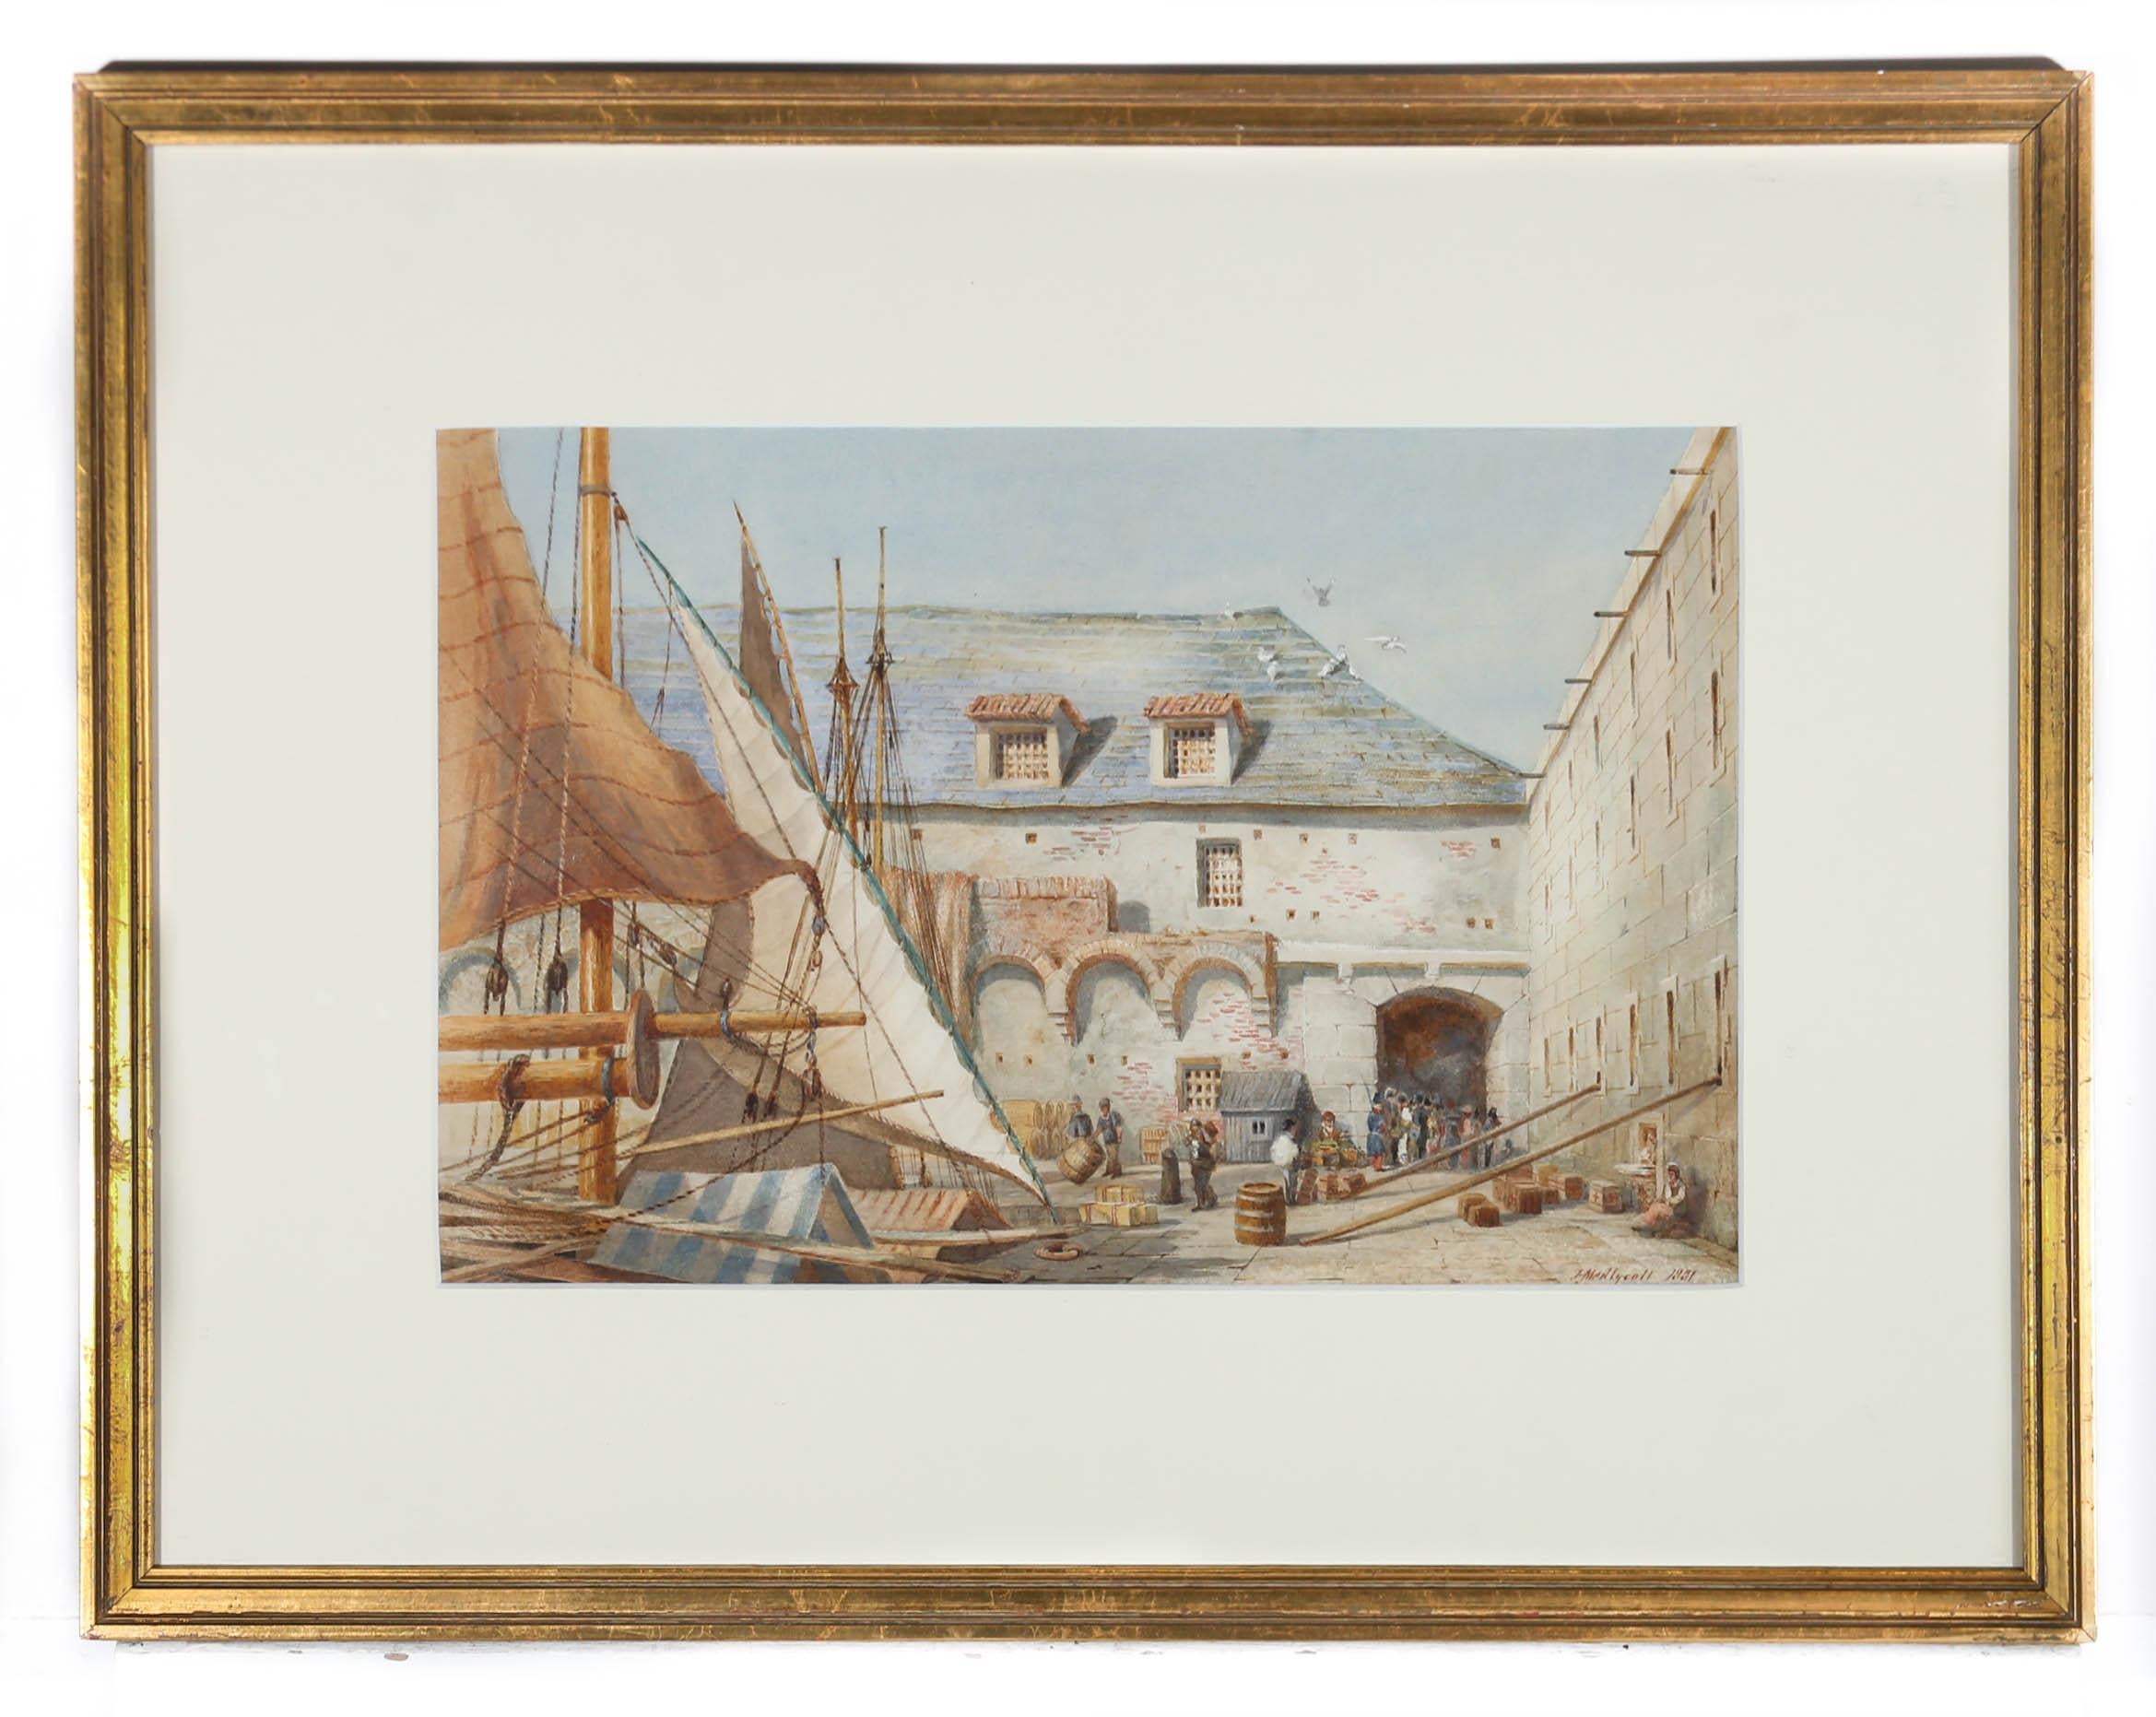 A delightful watercolour scene depicting a busy corner of Genoa Harbour on a sunny day. The large sails of the ships cast shadows over the scene, covering the men moving barrels and the small crowd that has gathered beneath an archway. Signed and